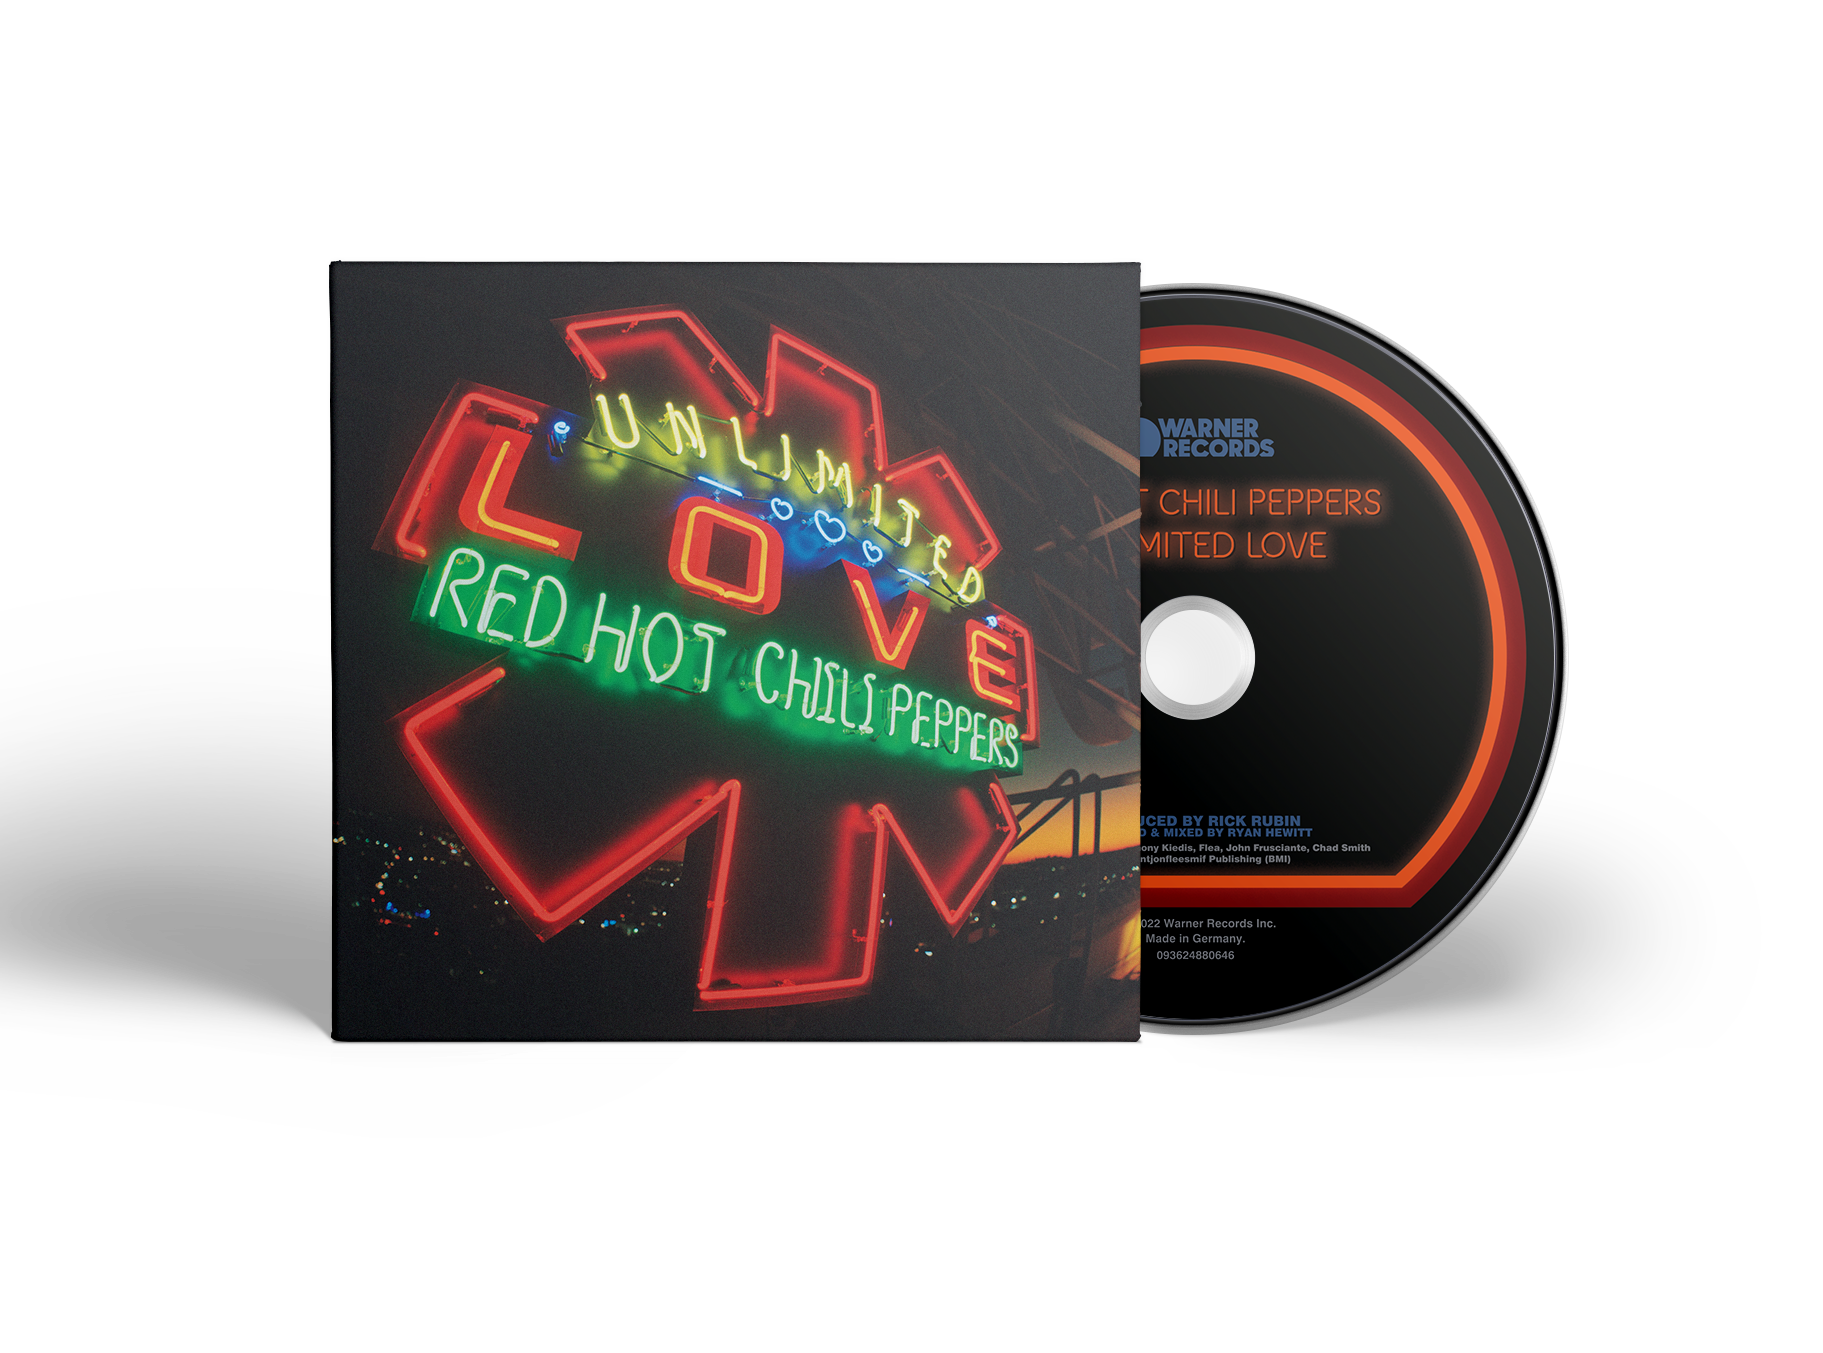 Unlimited Love Standard Cd Red Hot Chili Peppers – Warner Music